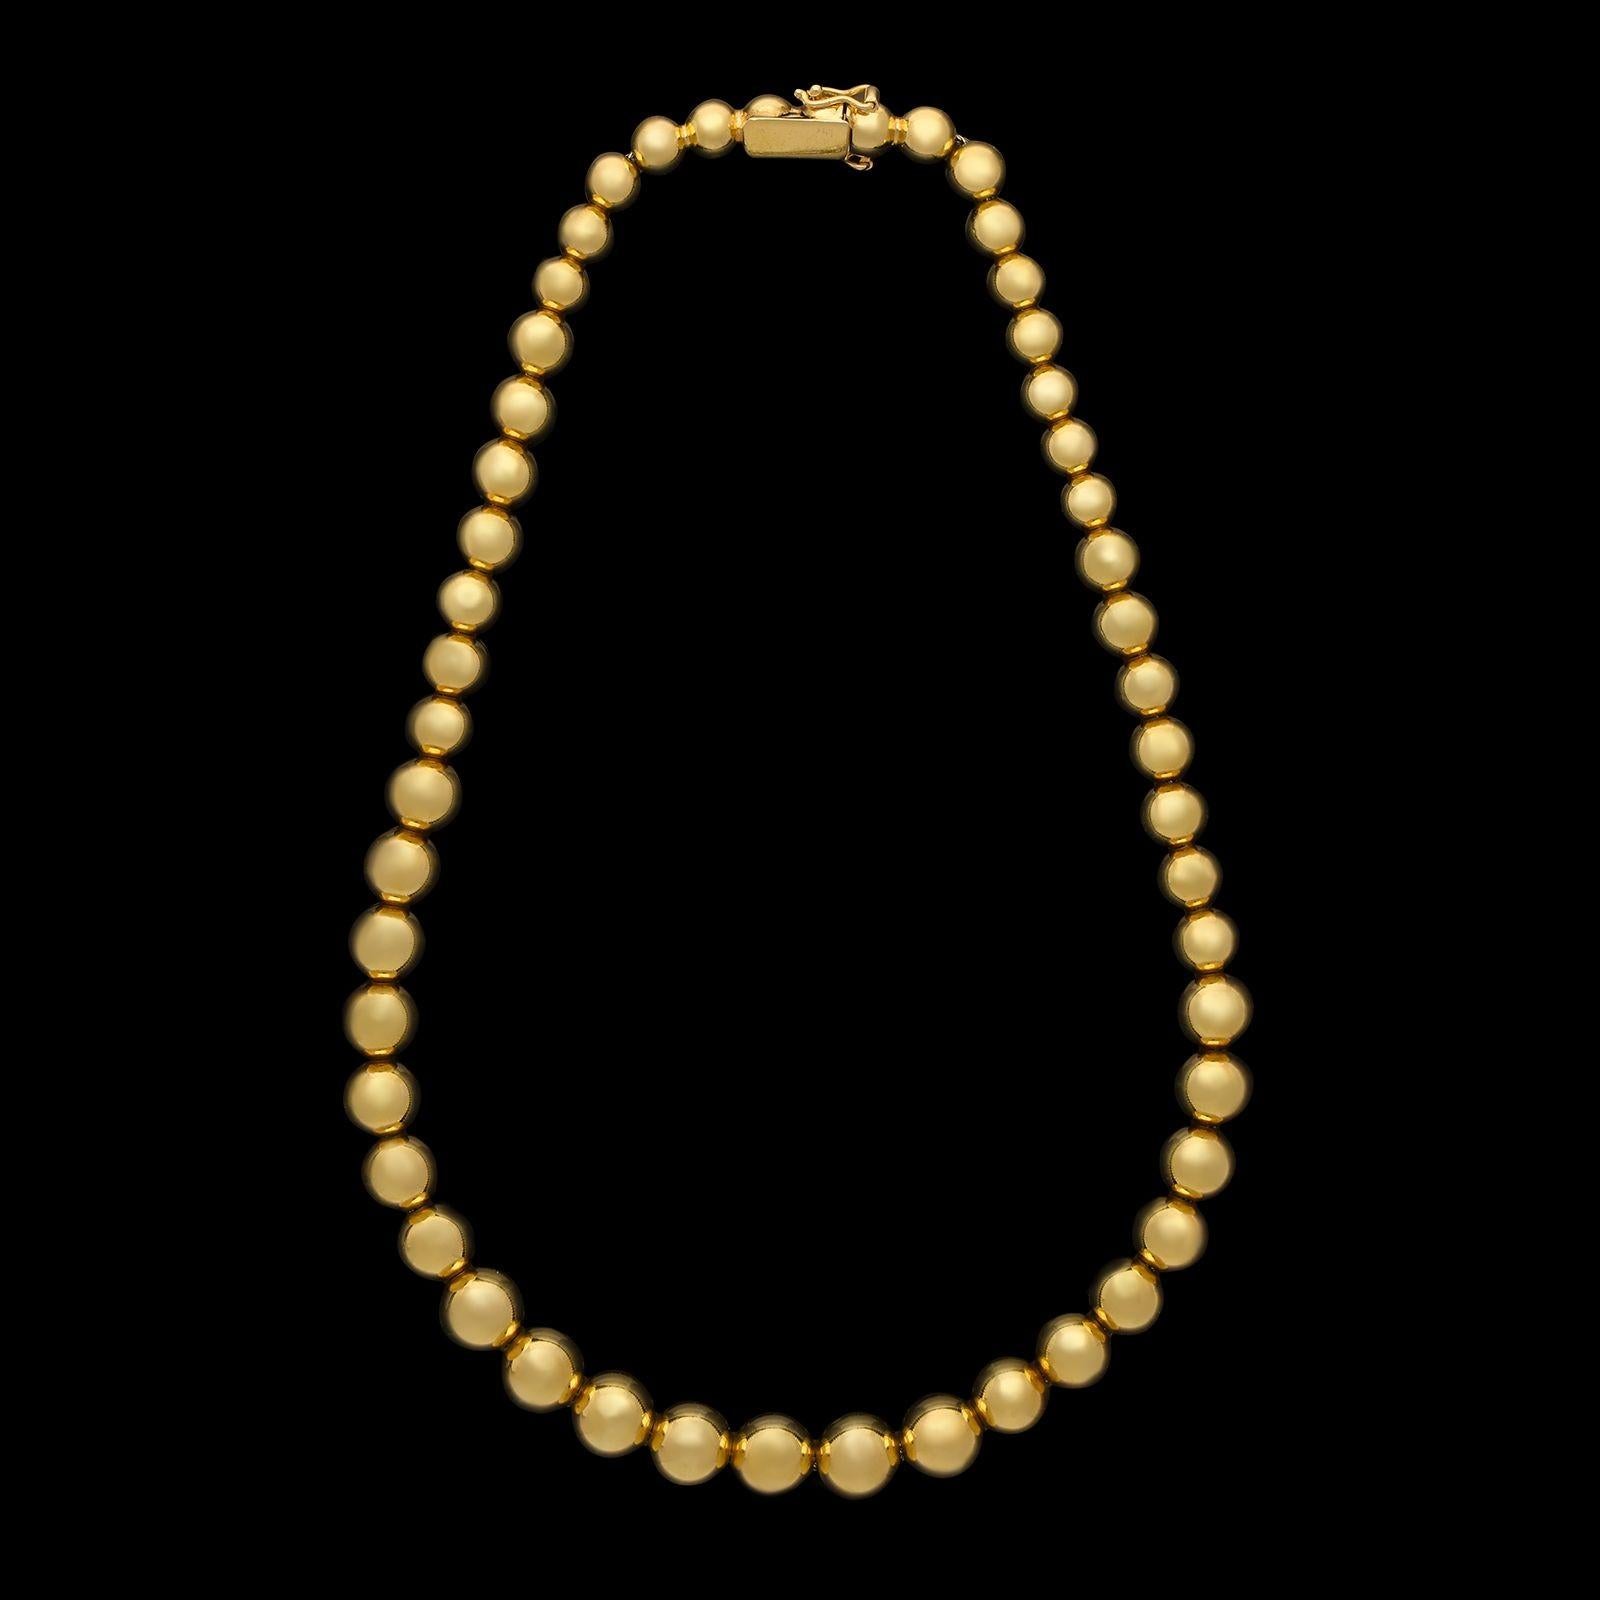 An 18ct gold bead necklace by Tiffany & Co, circa 1980s, the 16” necklace formed of fifty round gold highly polished beads, graduating smaller in size from front to back, all threaded onto a foxtail-link chain, making the necklace highly flexible,